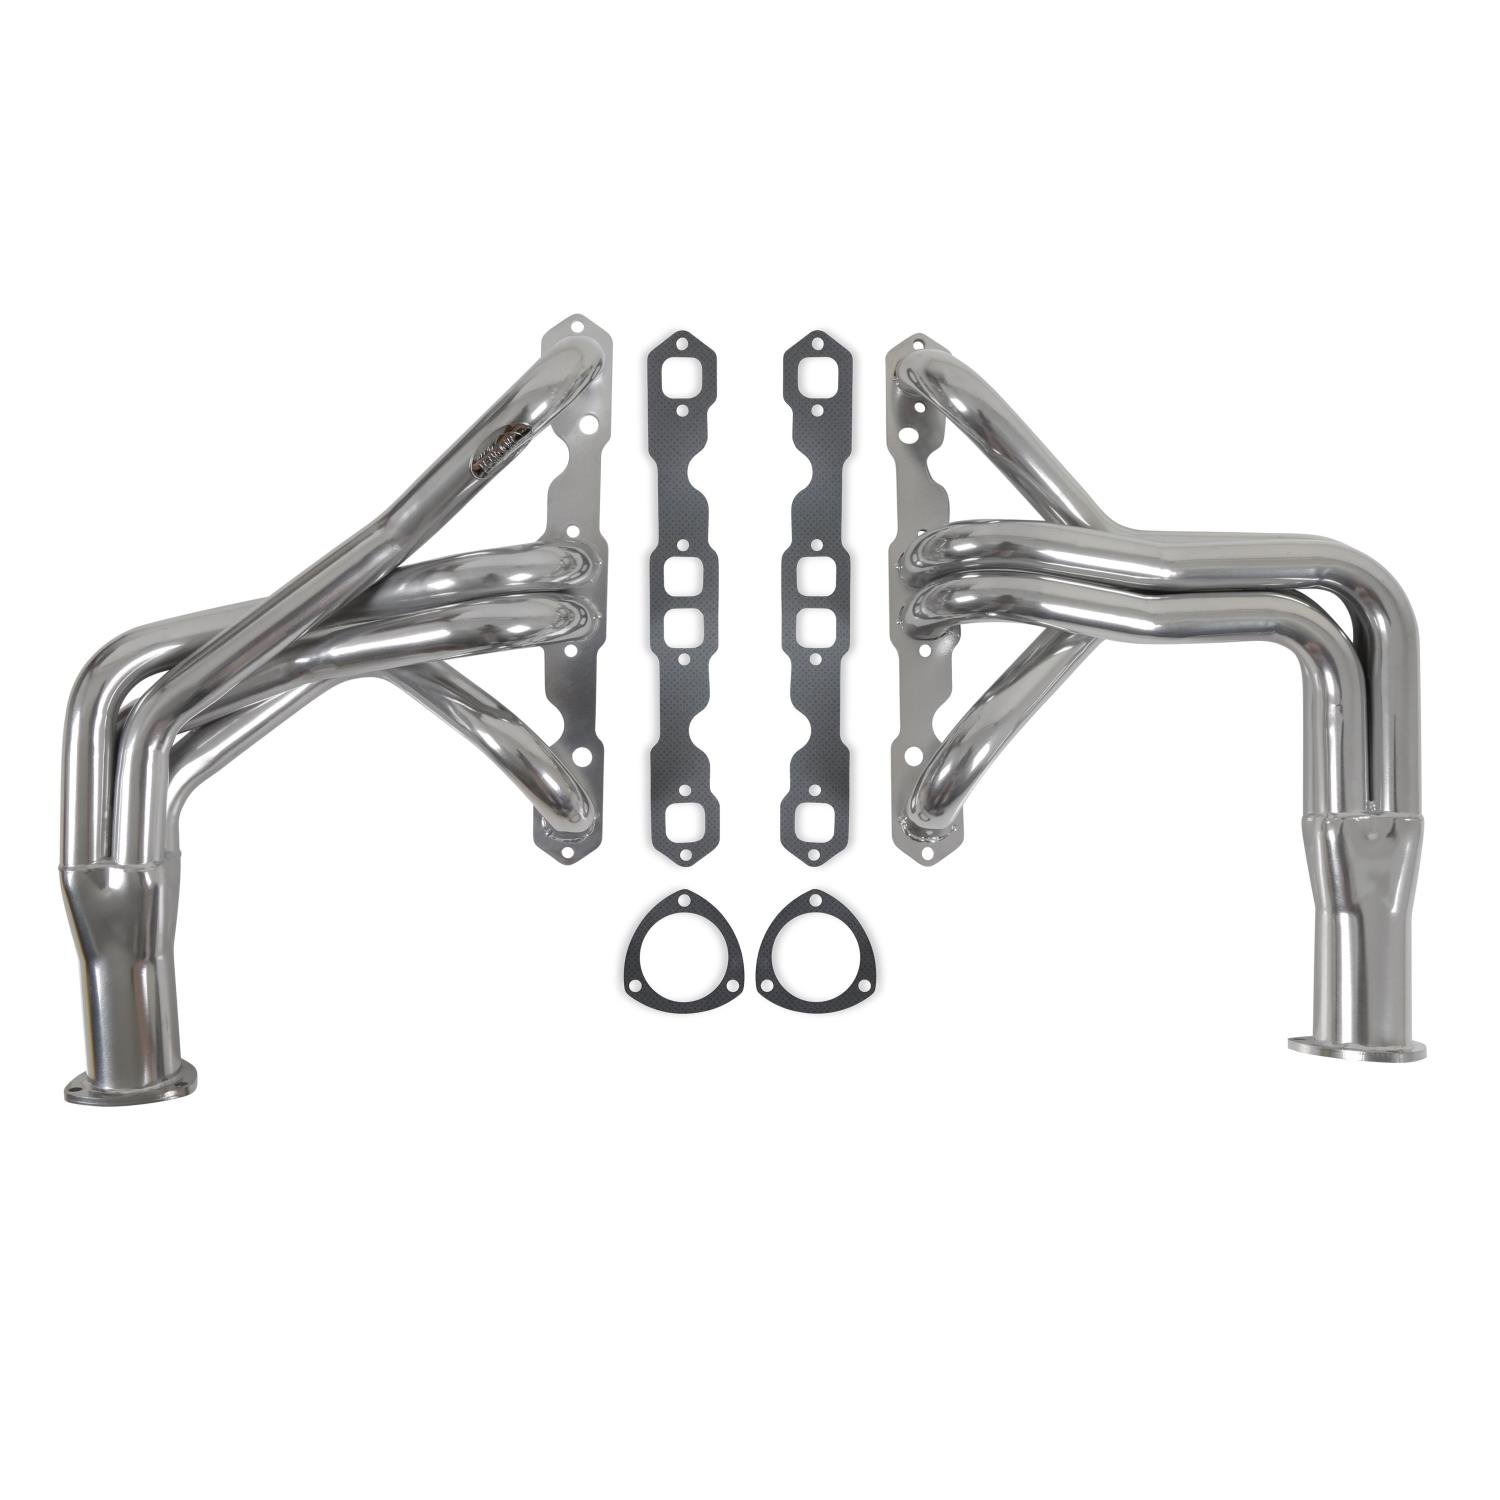 2456-1 Competition Long Tube Headers 265-400 Chevy Small Block V8